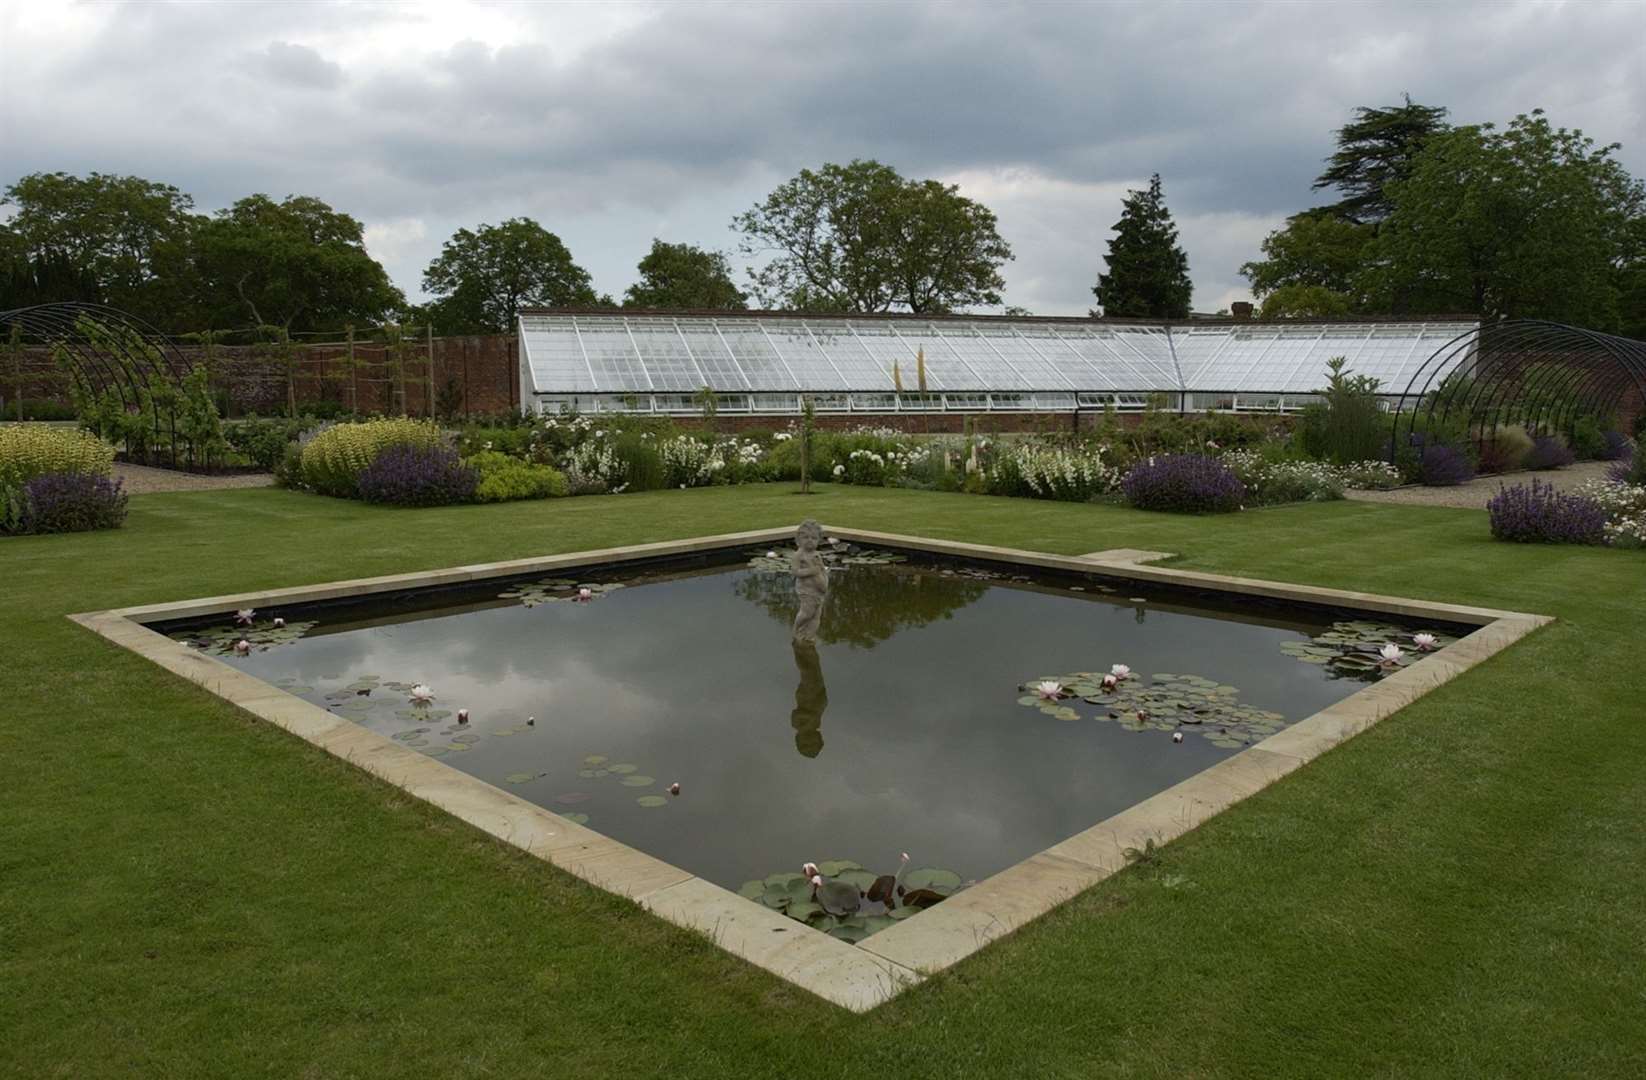 The gardens at Belmont House,Throwley are open to visitors year round. Picture: Gerry Whittaker